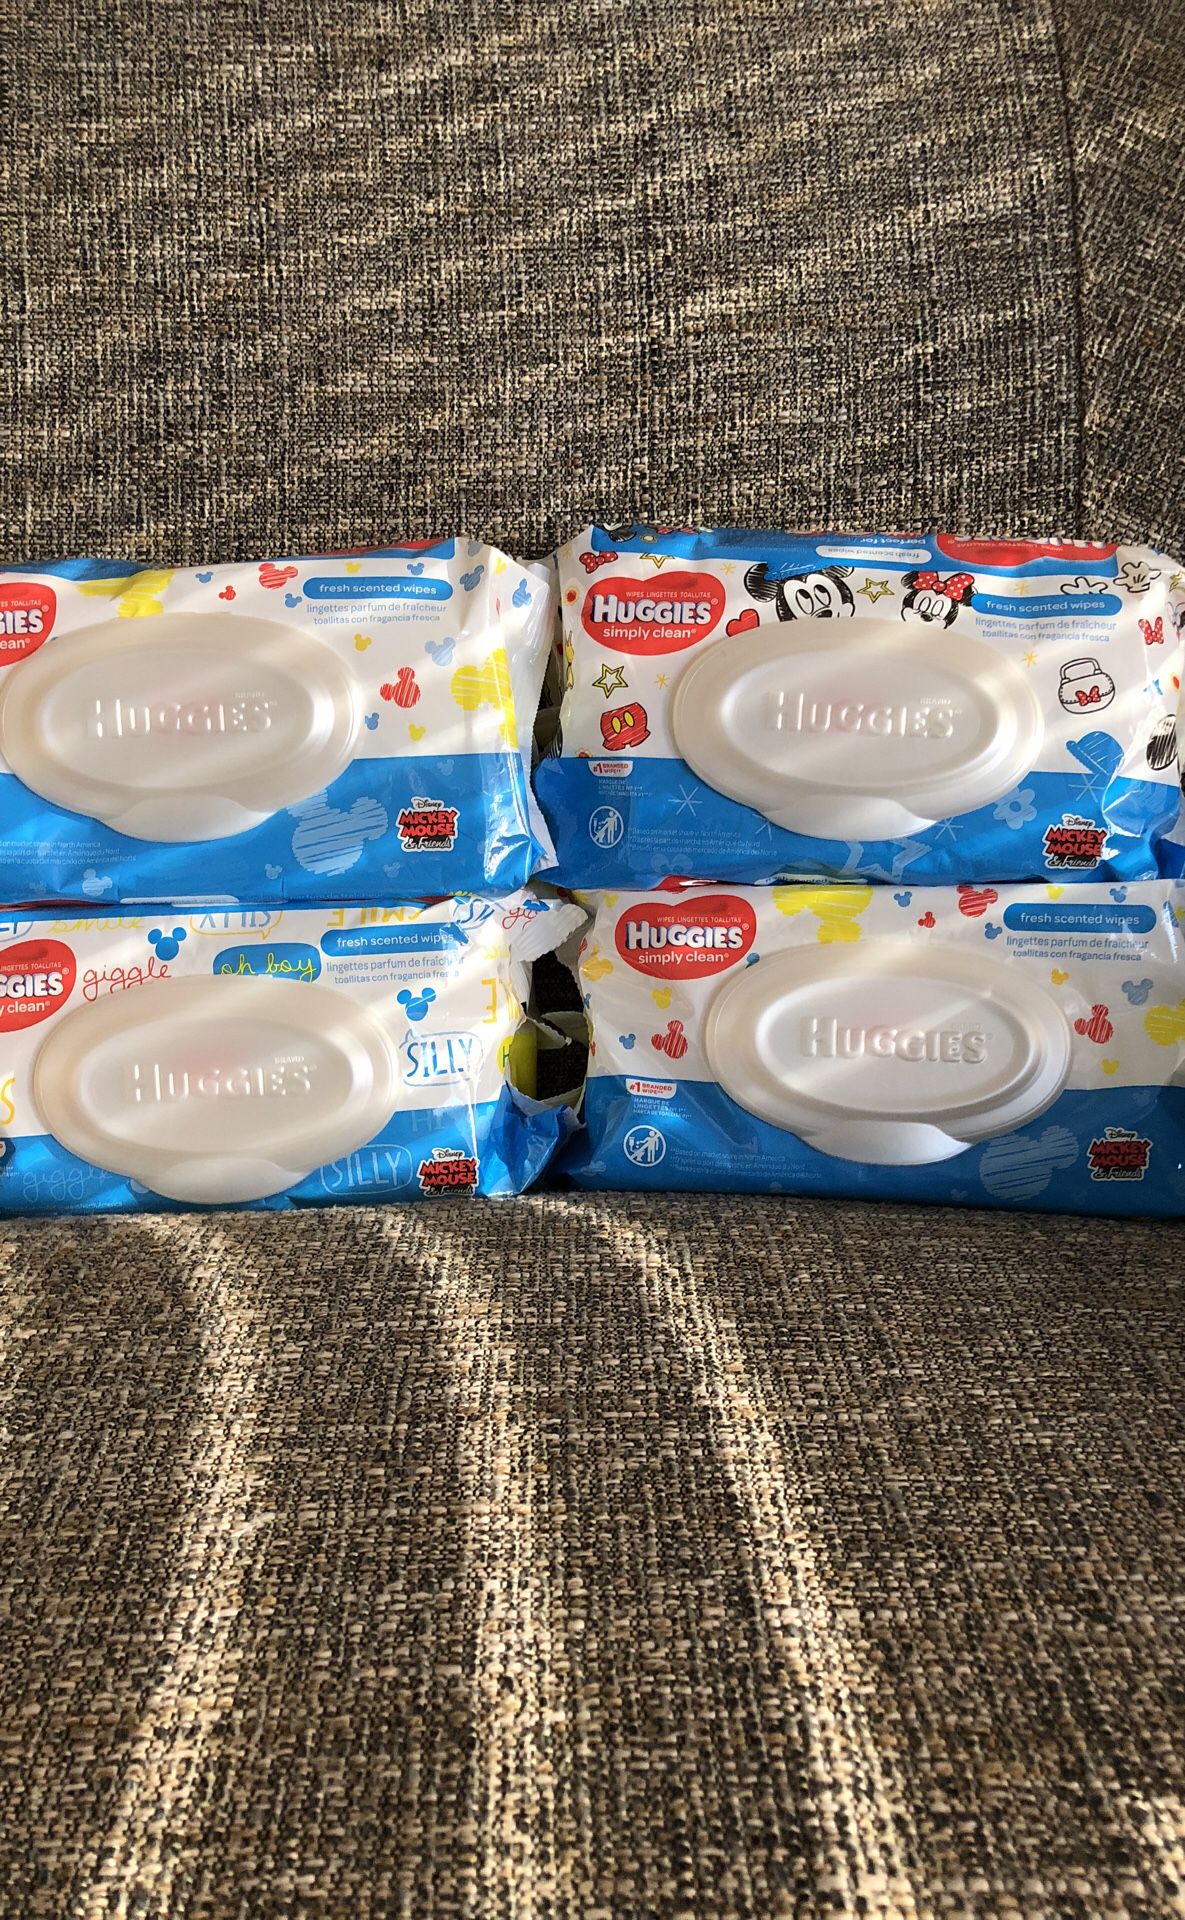 Not available 4 Packs of Huggies Wipes. Please see all the pictures and read the description